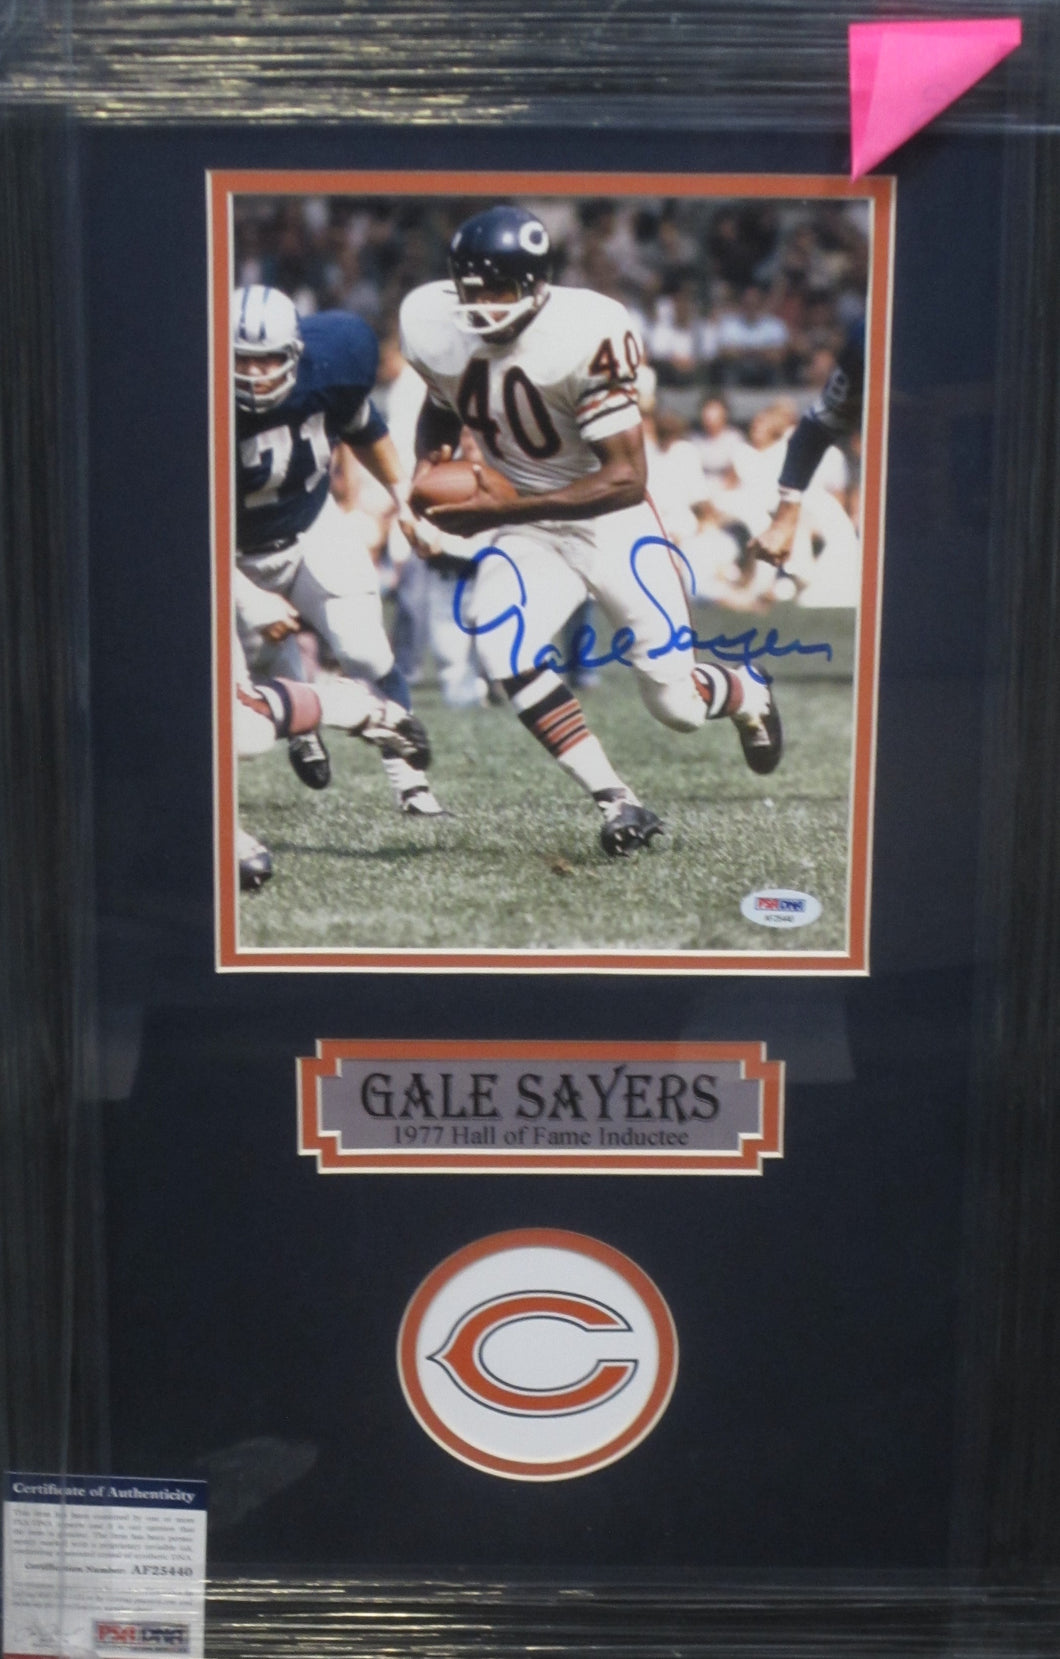 Chicago Bears Gale Sayers SIGNED Framed Matted 8x10 Photo With PSA COA